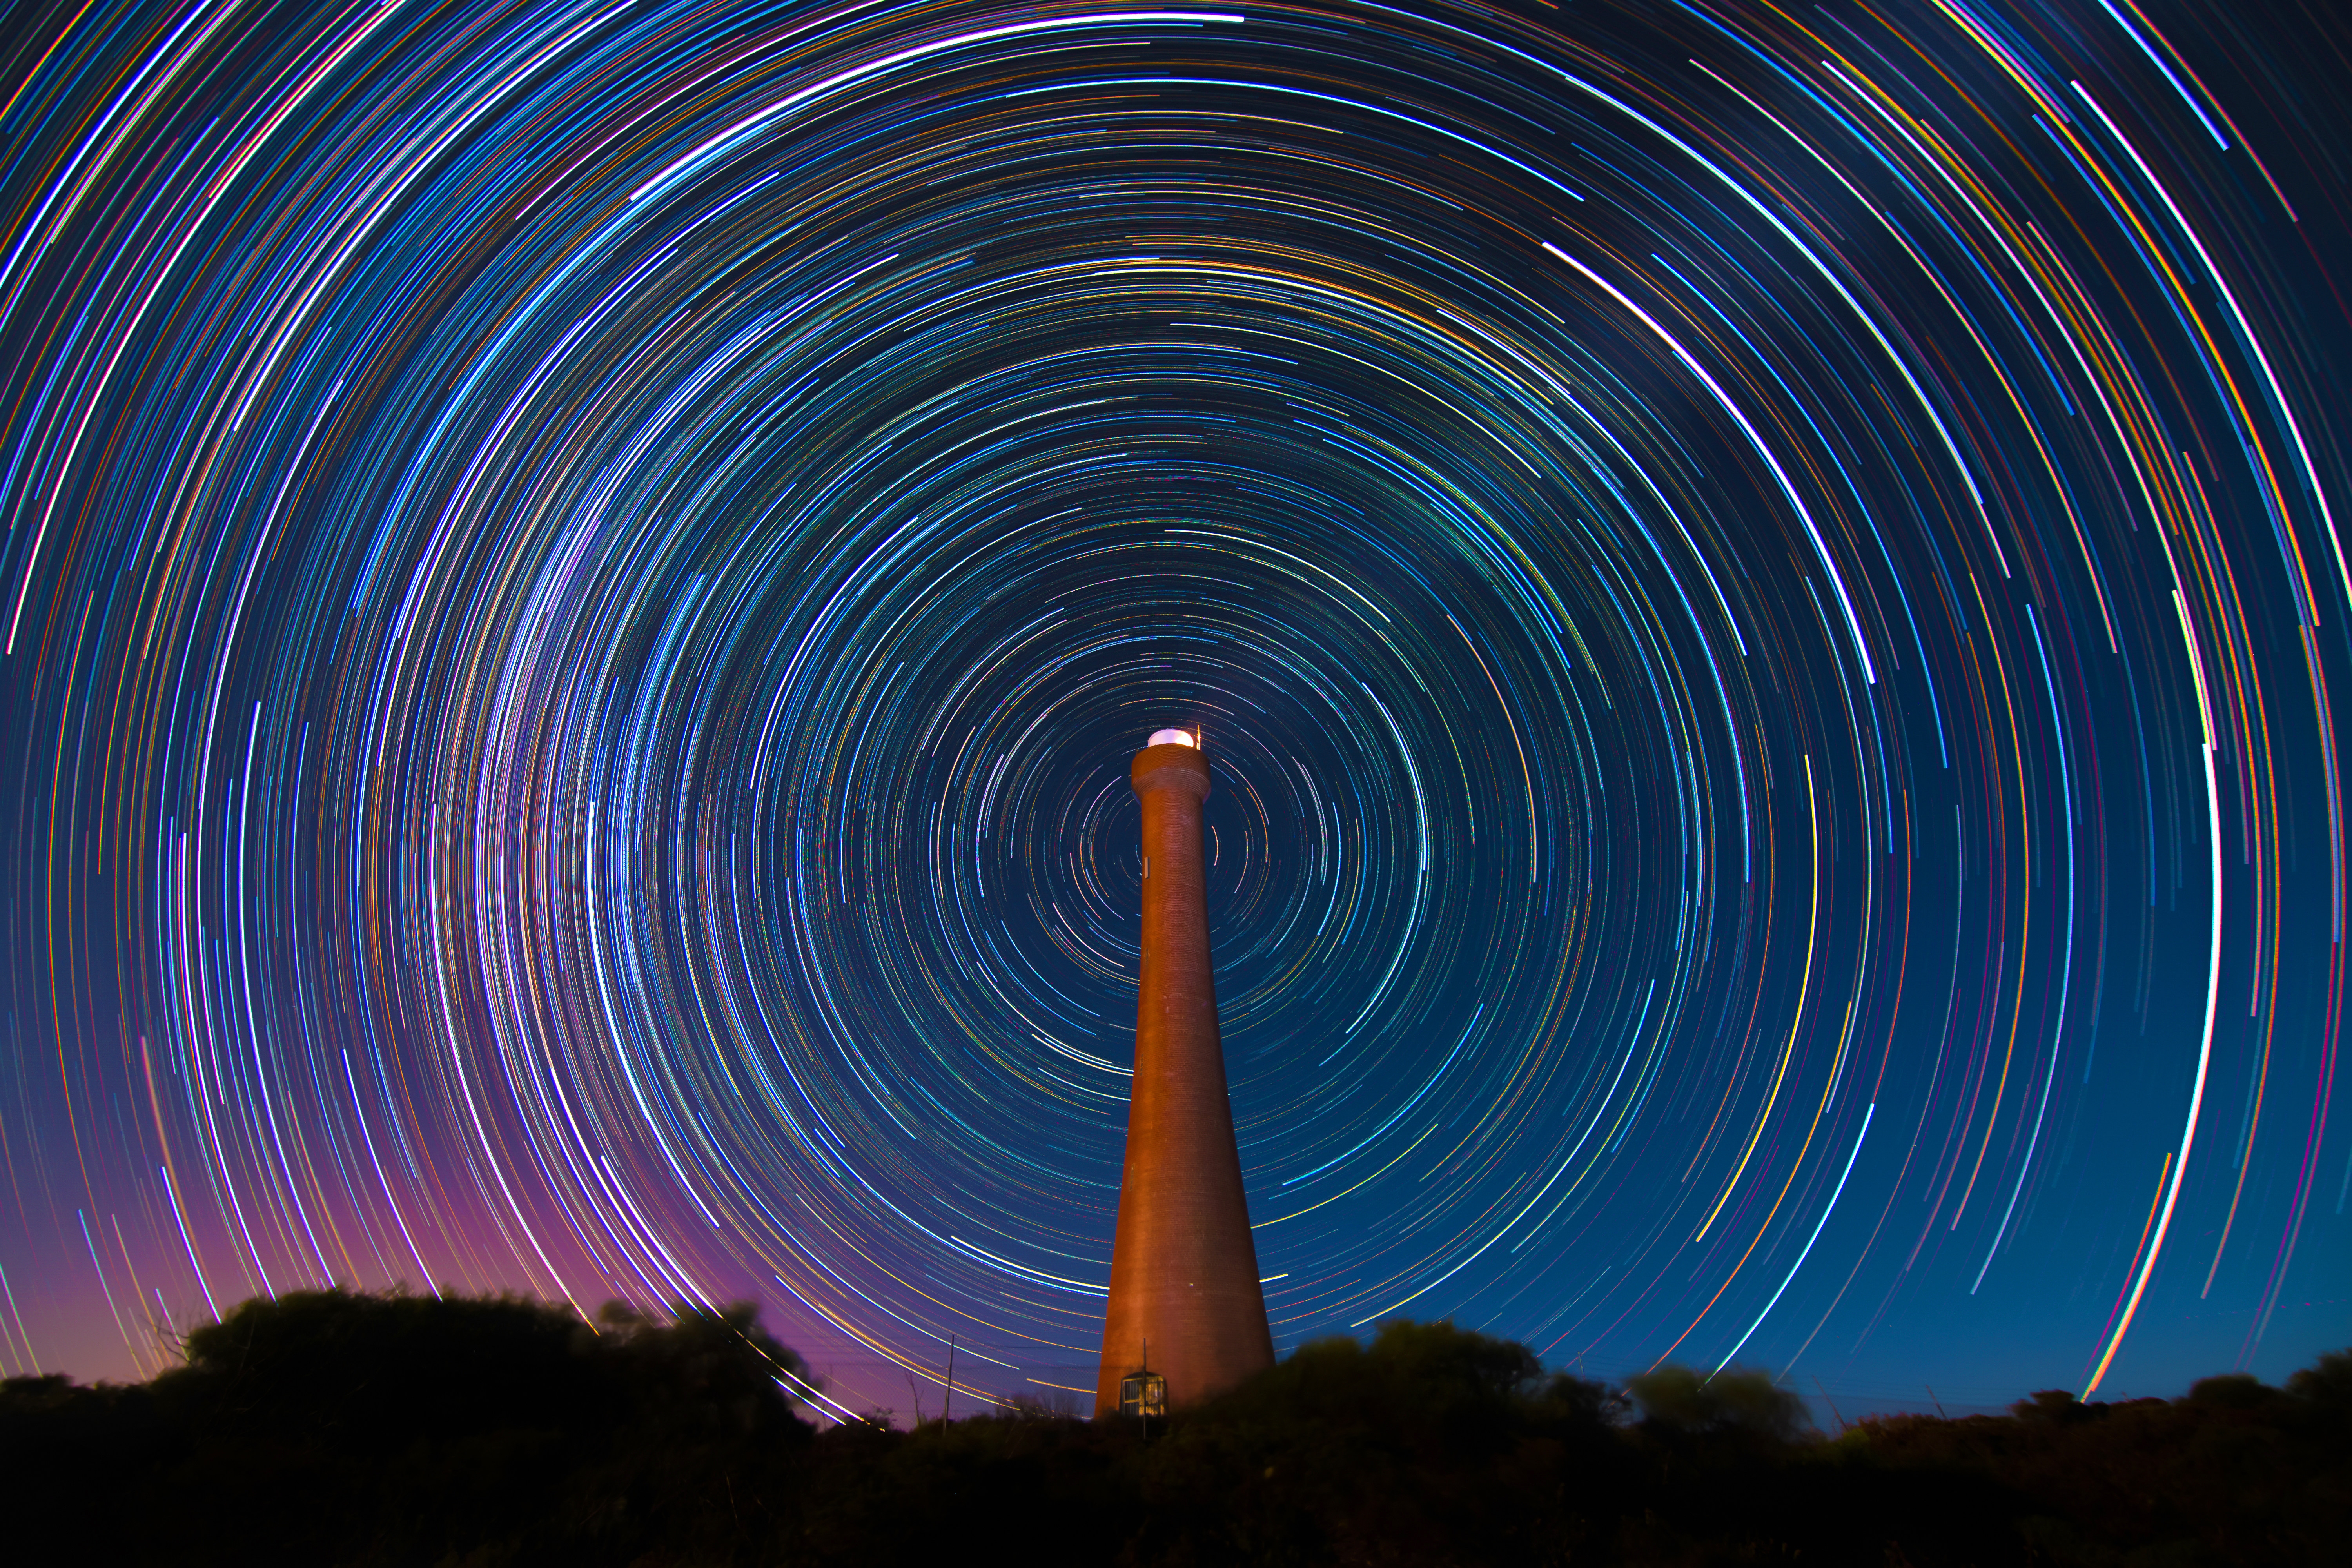 HD wallpaper, Astronomy, Outer Space, Circular, Star Trails, Long Exposure, Night Time, Australia, Guilderton Lighthouse, 5K